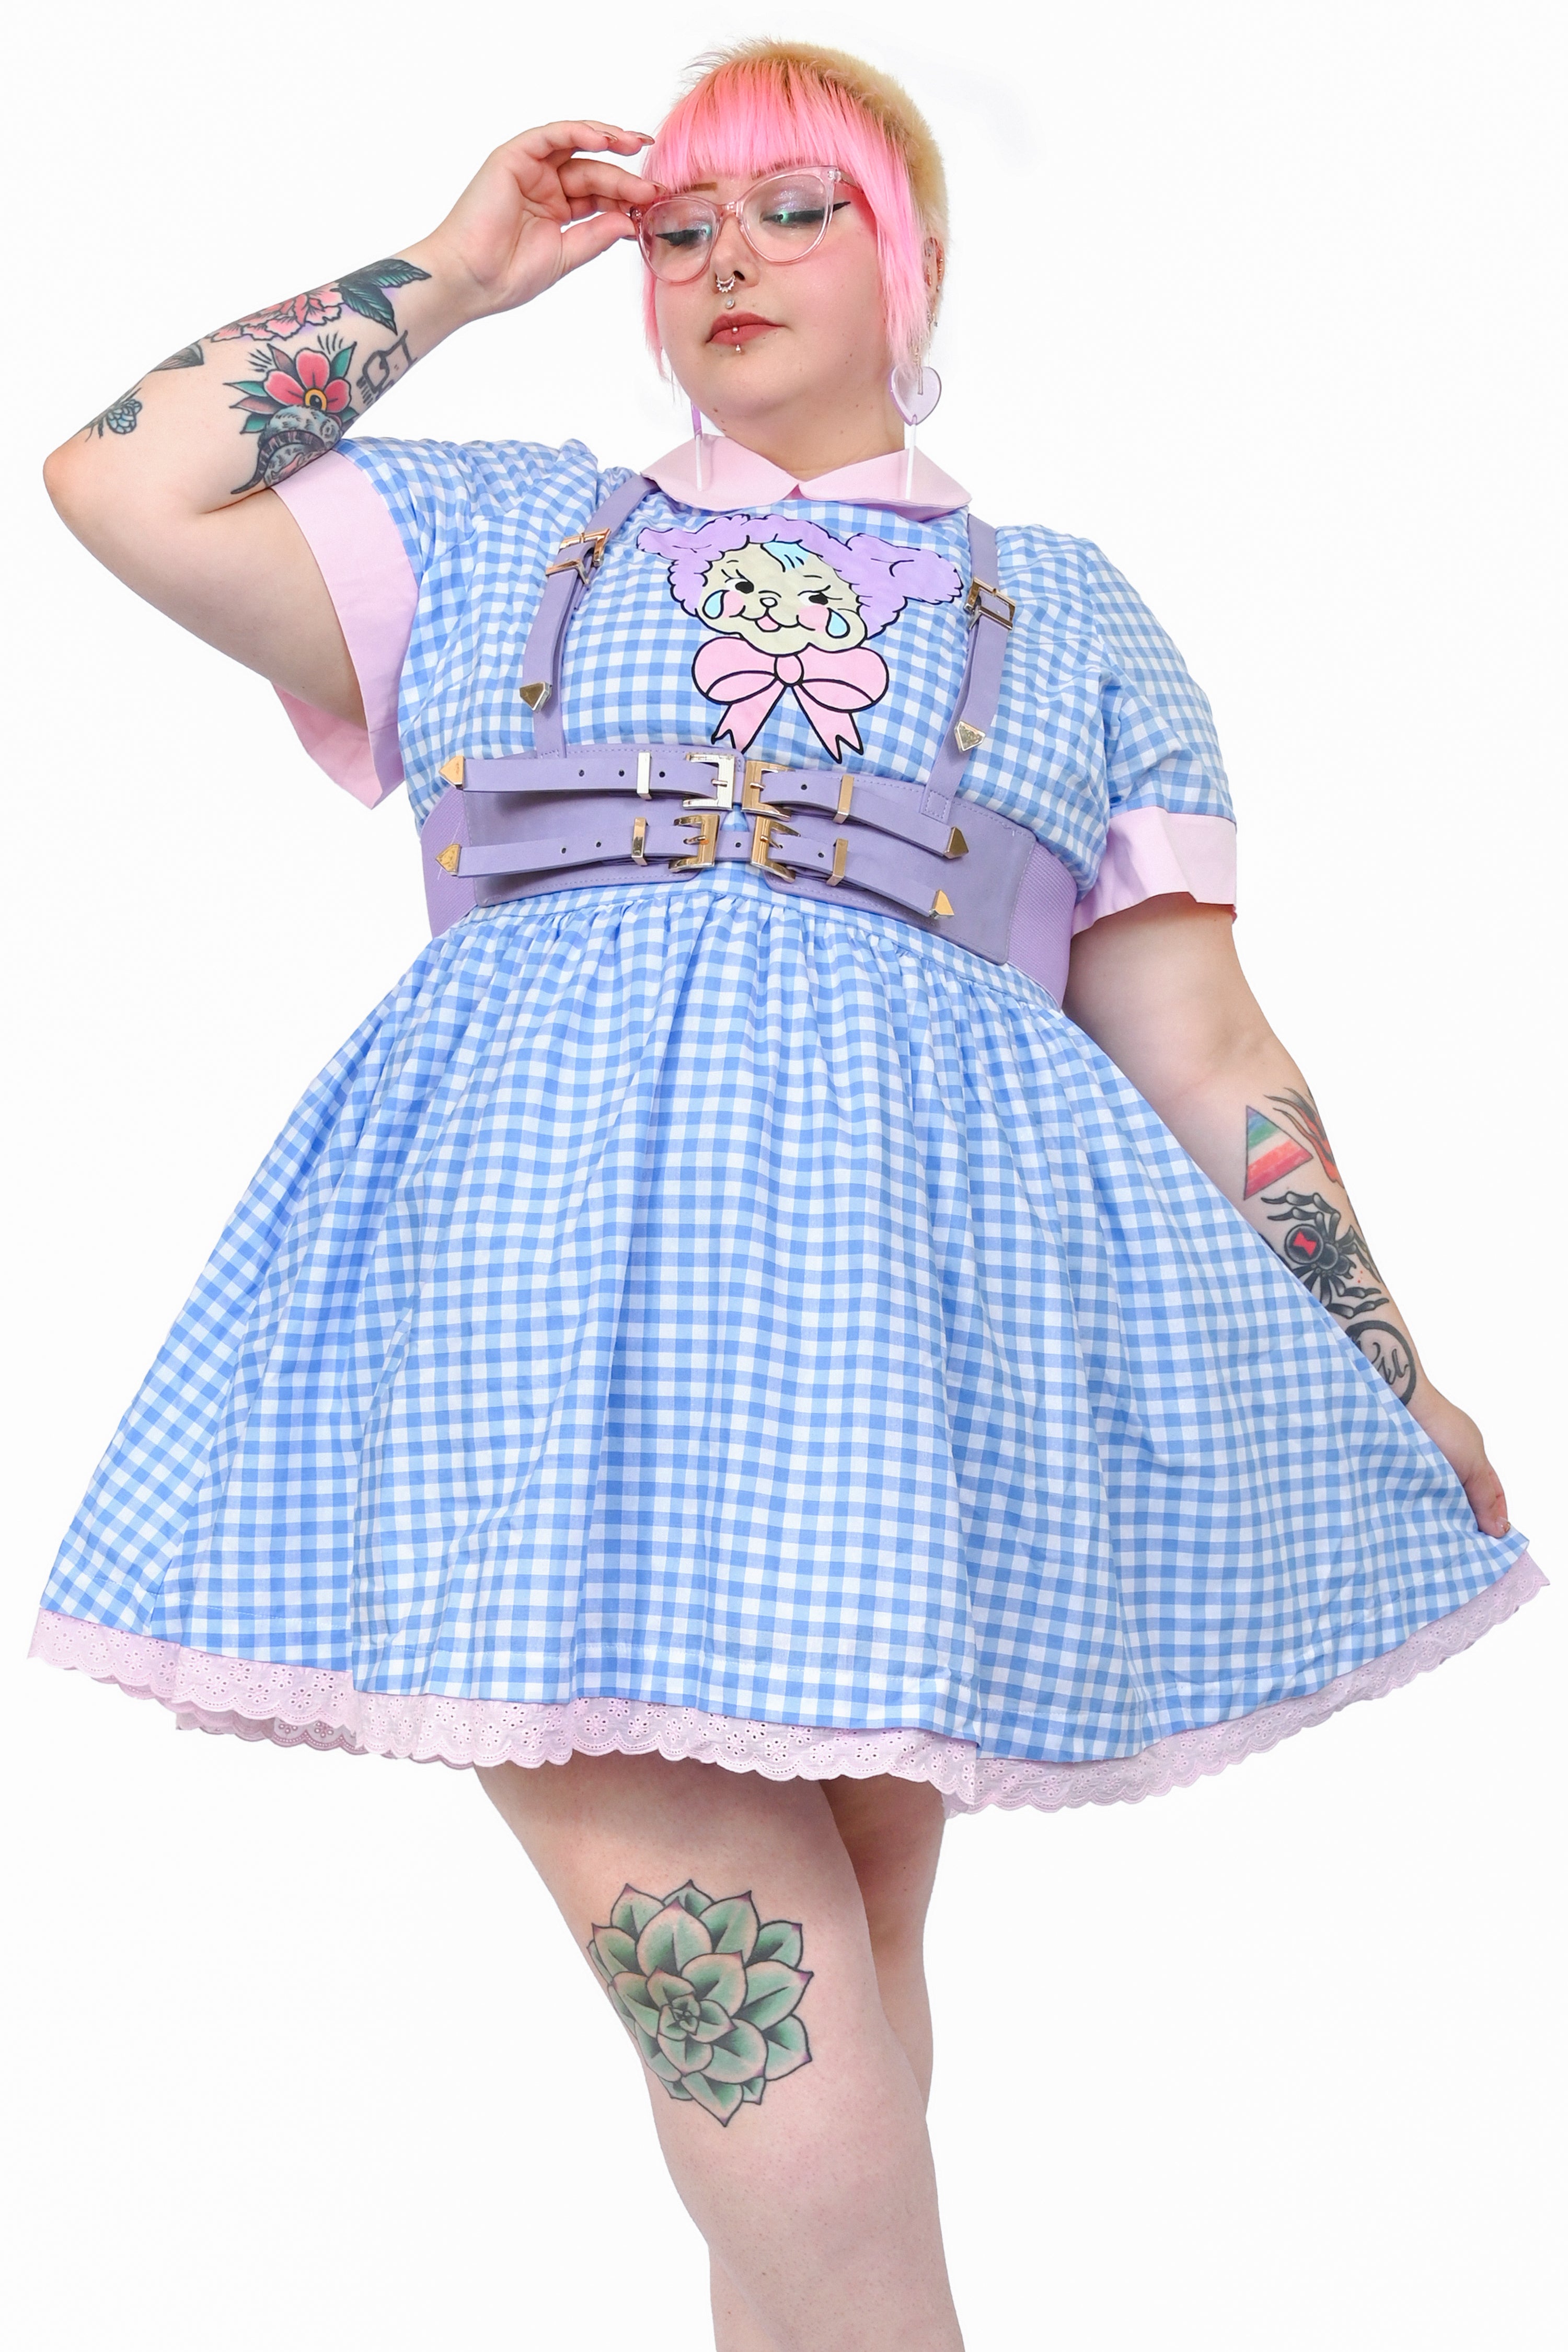 Knee length gingham dress with pink collar and trim, featuring a cute crying teddy bear graphic on the front